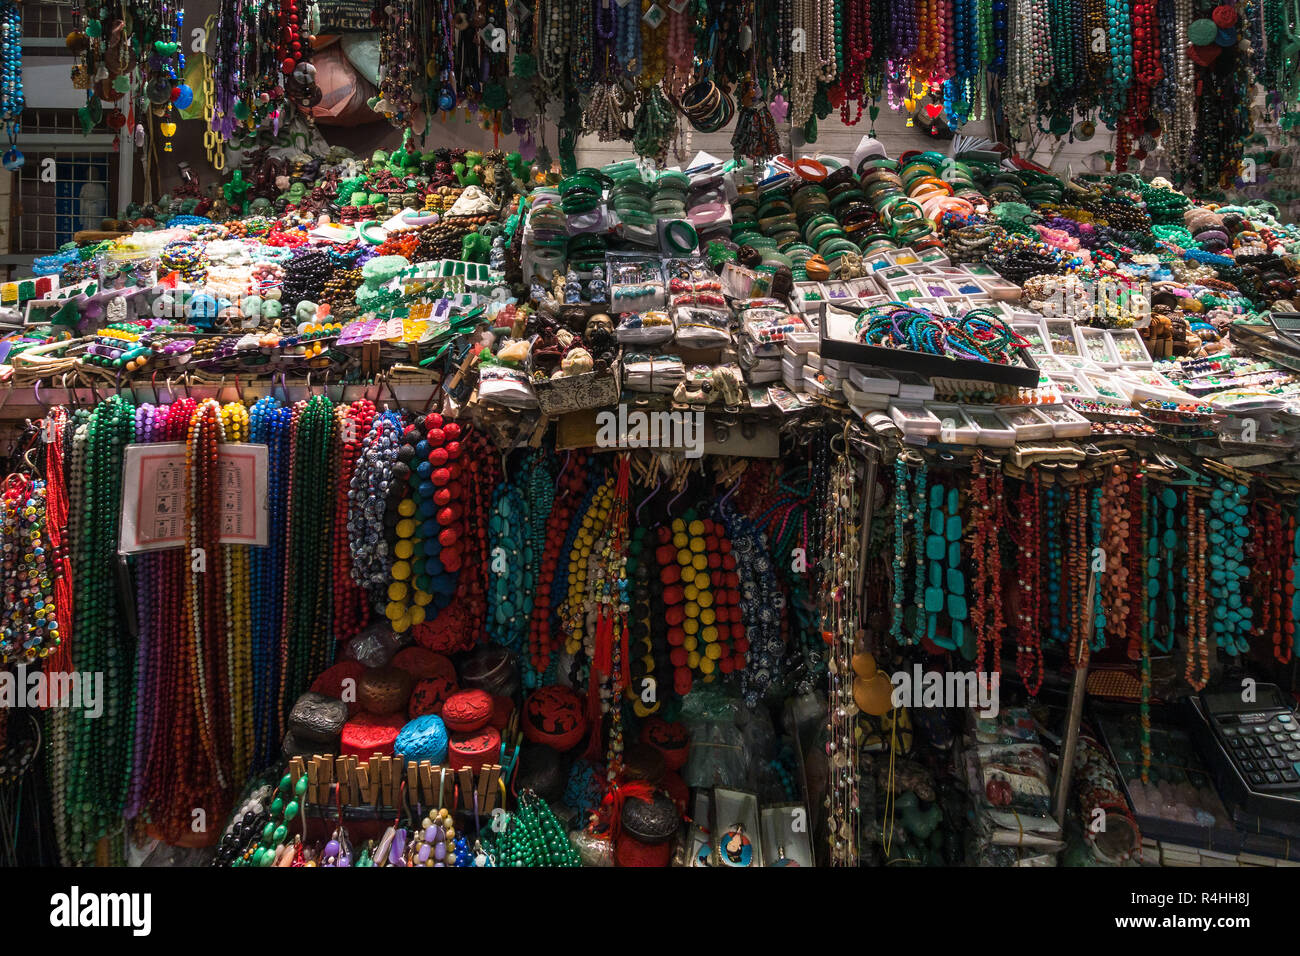 A stall selling necklaces and bracelets at Hong Kong Jade market Stock ...